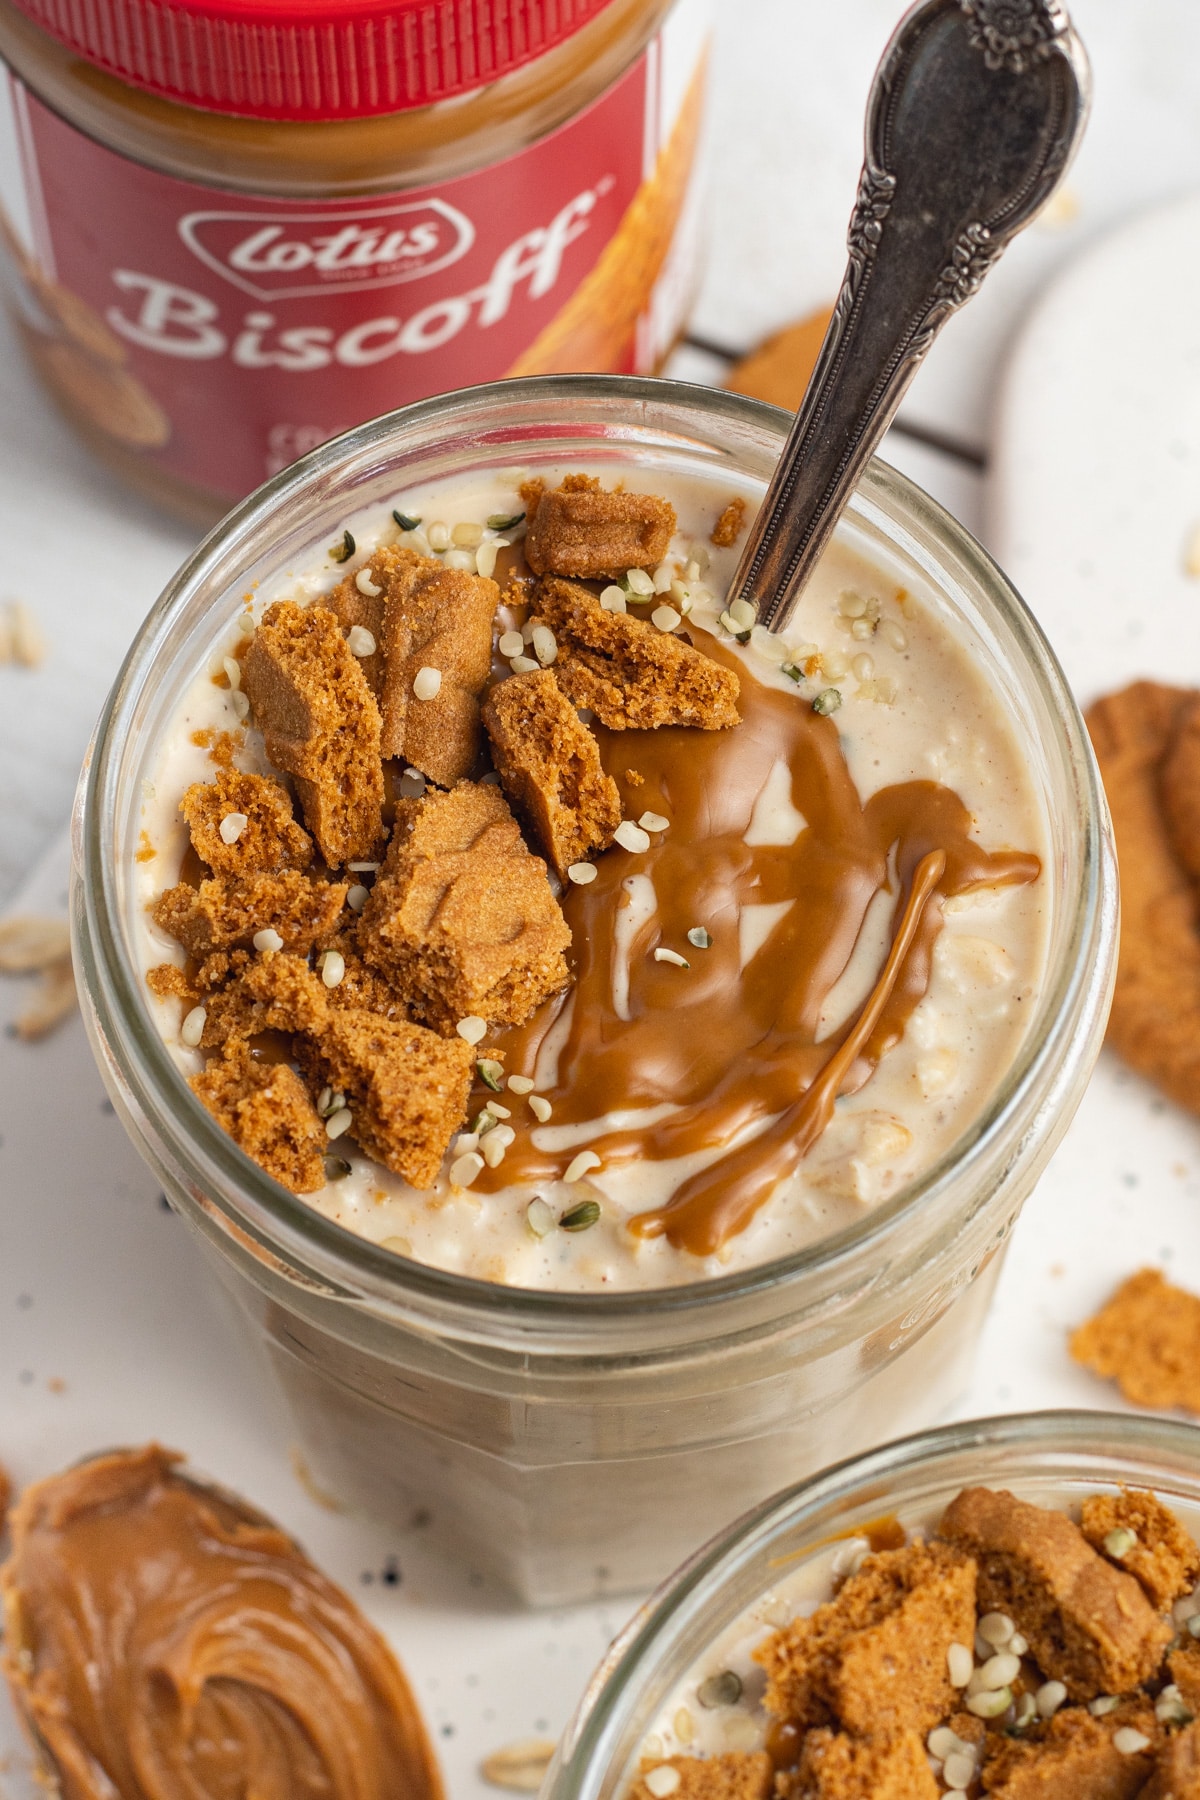 This is a picture of Biscoff overnight oats.